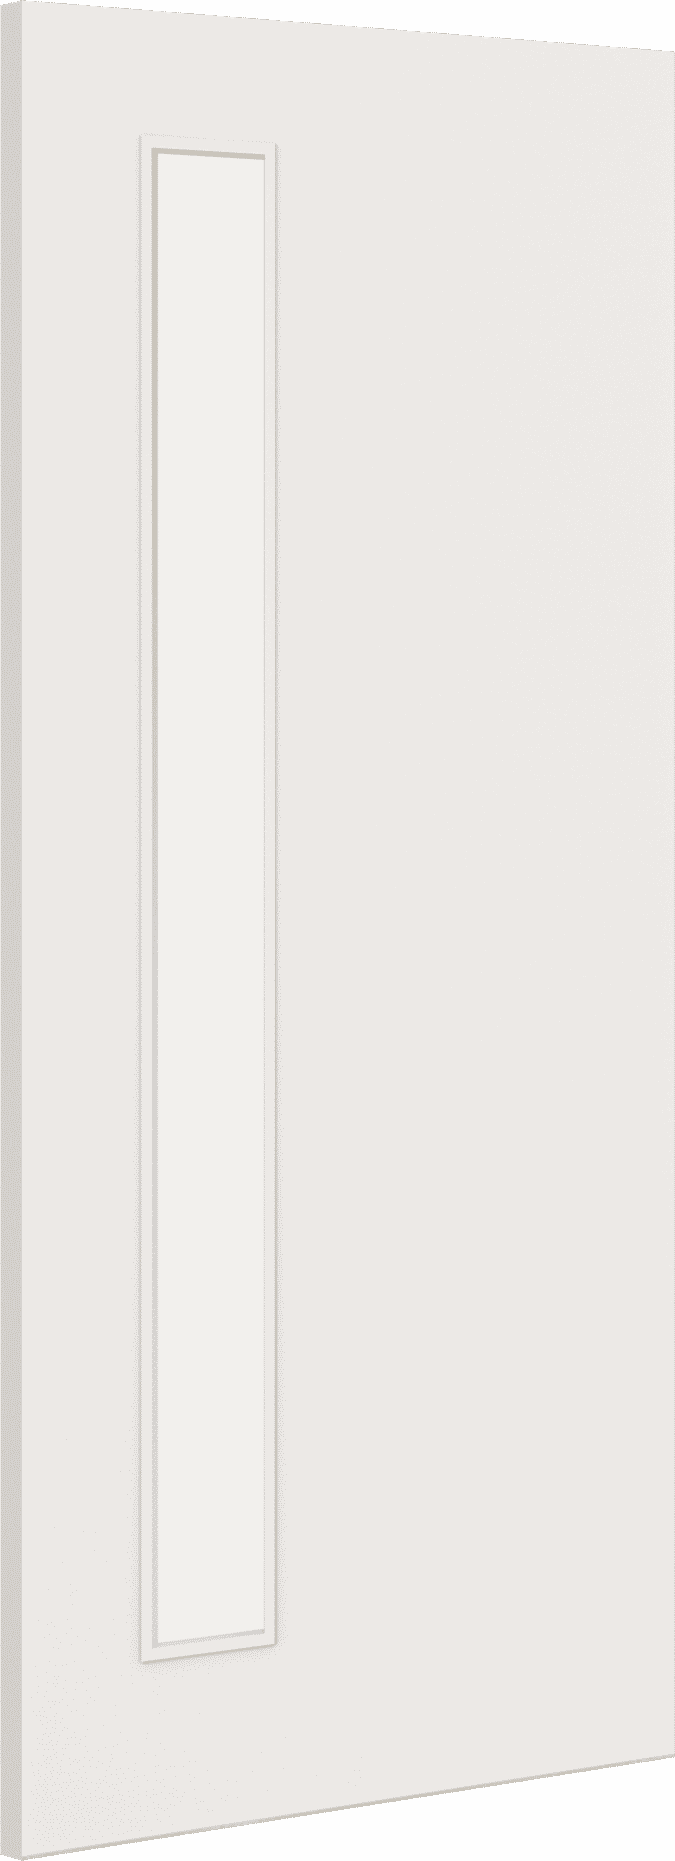 1981mm x 533mm x 44mm (21") Architectural Paint Grade White 06 Frosted Glazed Fire Door Blank